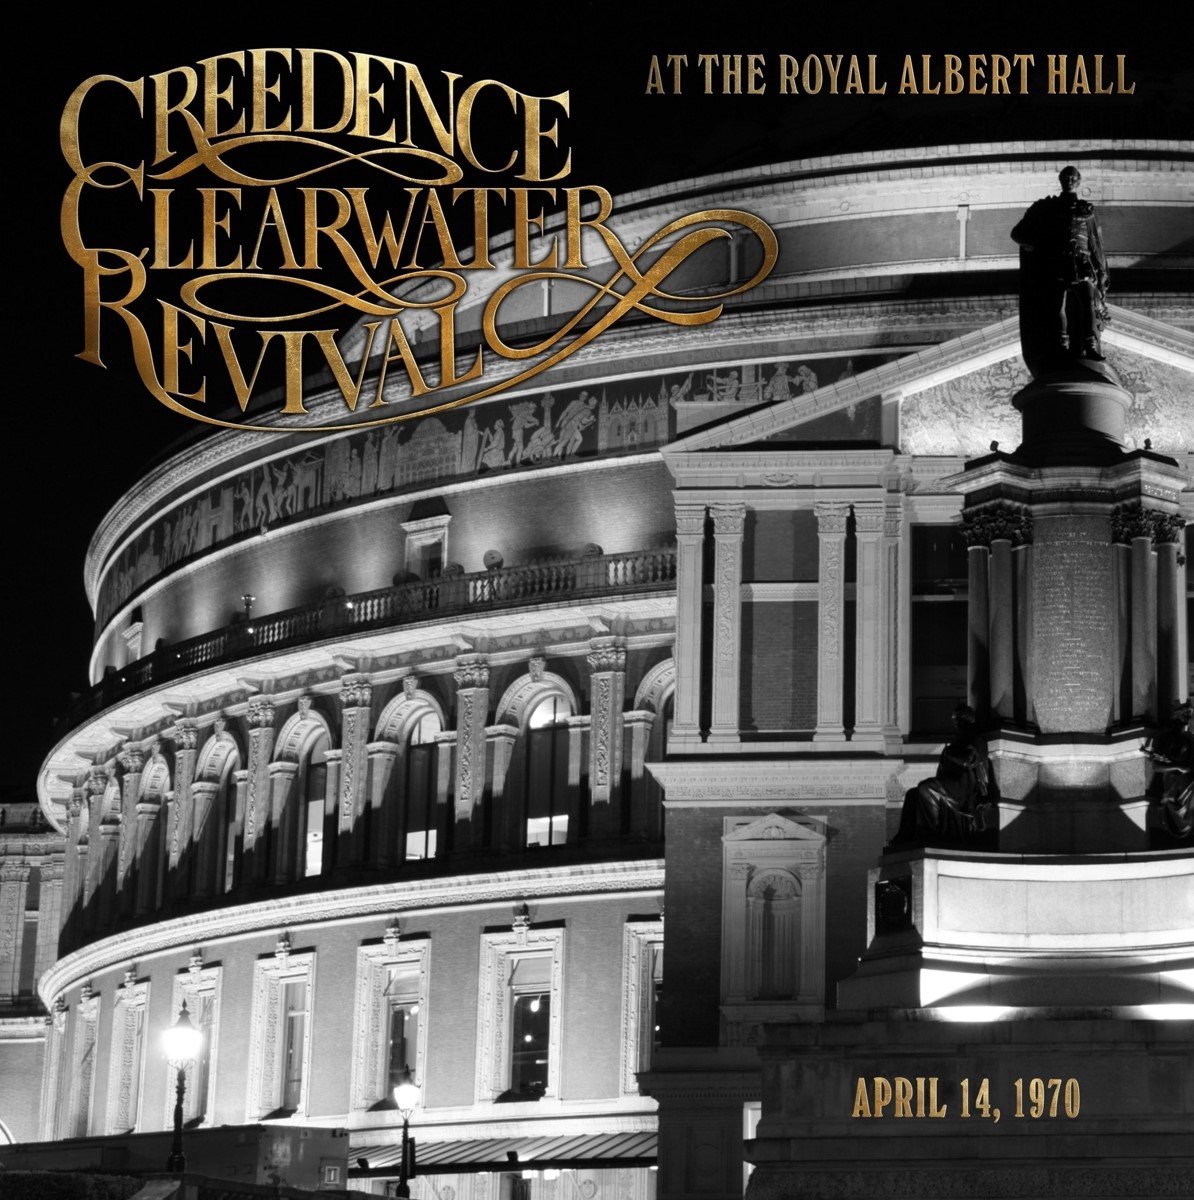 At The Royal Albert Hall | Creedence Clearwater Revival Albert poza noua